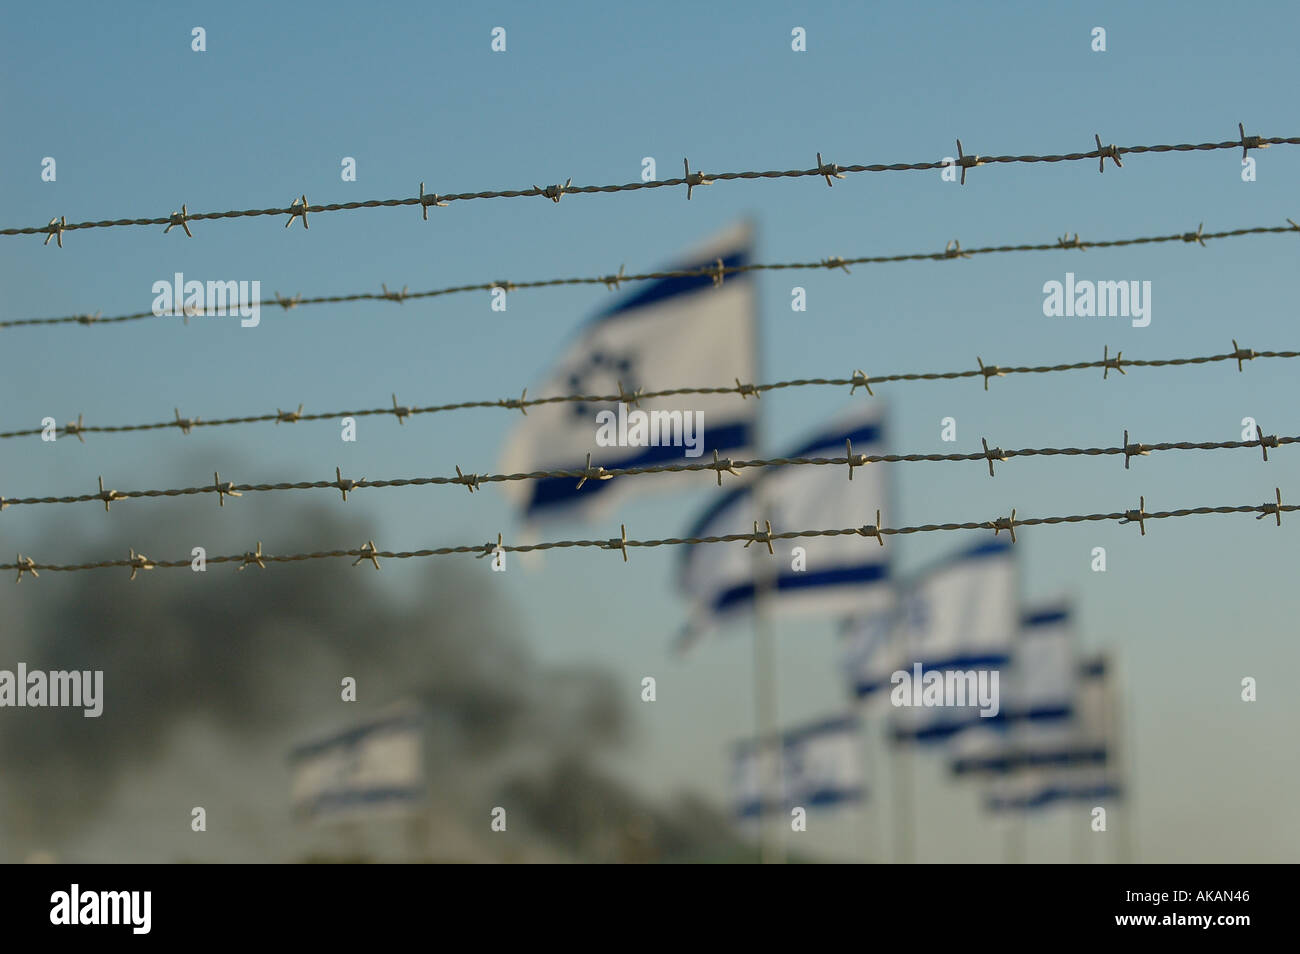 Row of Israeli flags flutter in the wind behind barbed wire fence with heavy smoke in background during Jewish settlement evacuation from Gaza strip Stock Photo